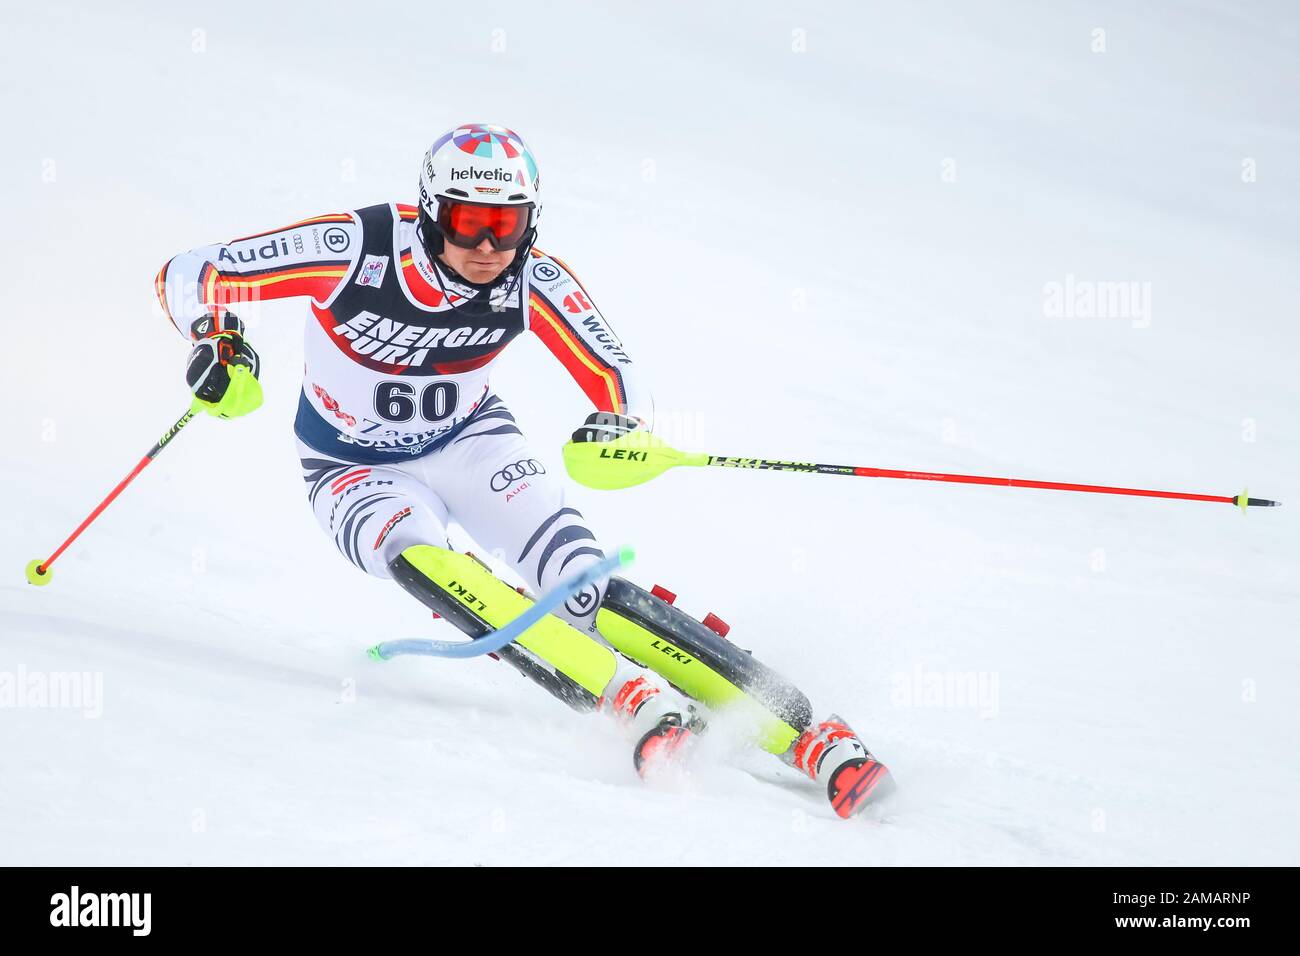 Zagreb, Croatia - January 5, 2020 : Stefan Luitz from Germany competing during the Audi FIS Alpine Ski World Cup 2019/2020, 3rd Mens Slalom, Snow Quee Stock Photo